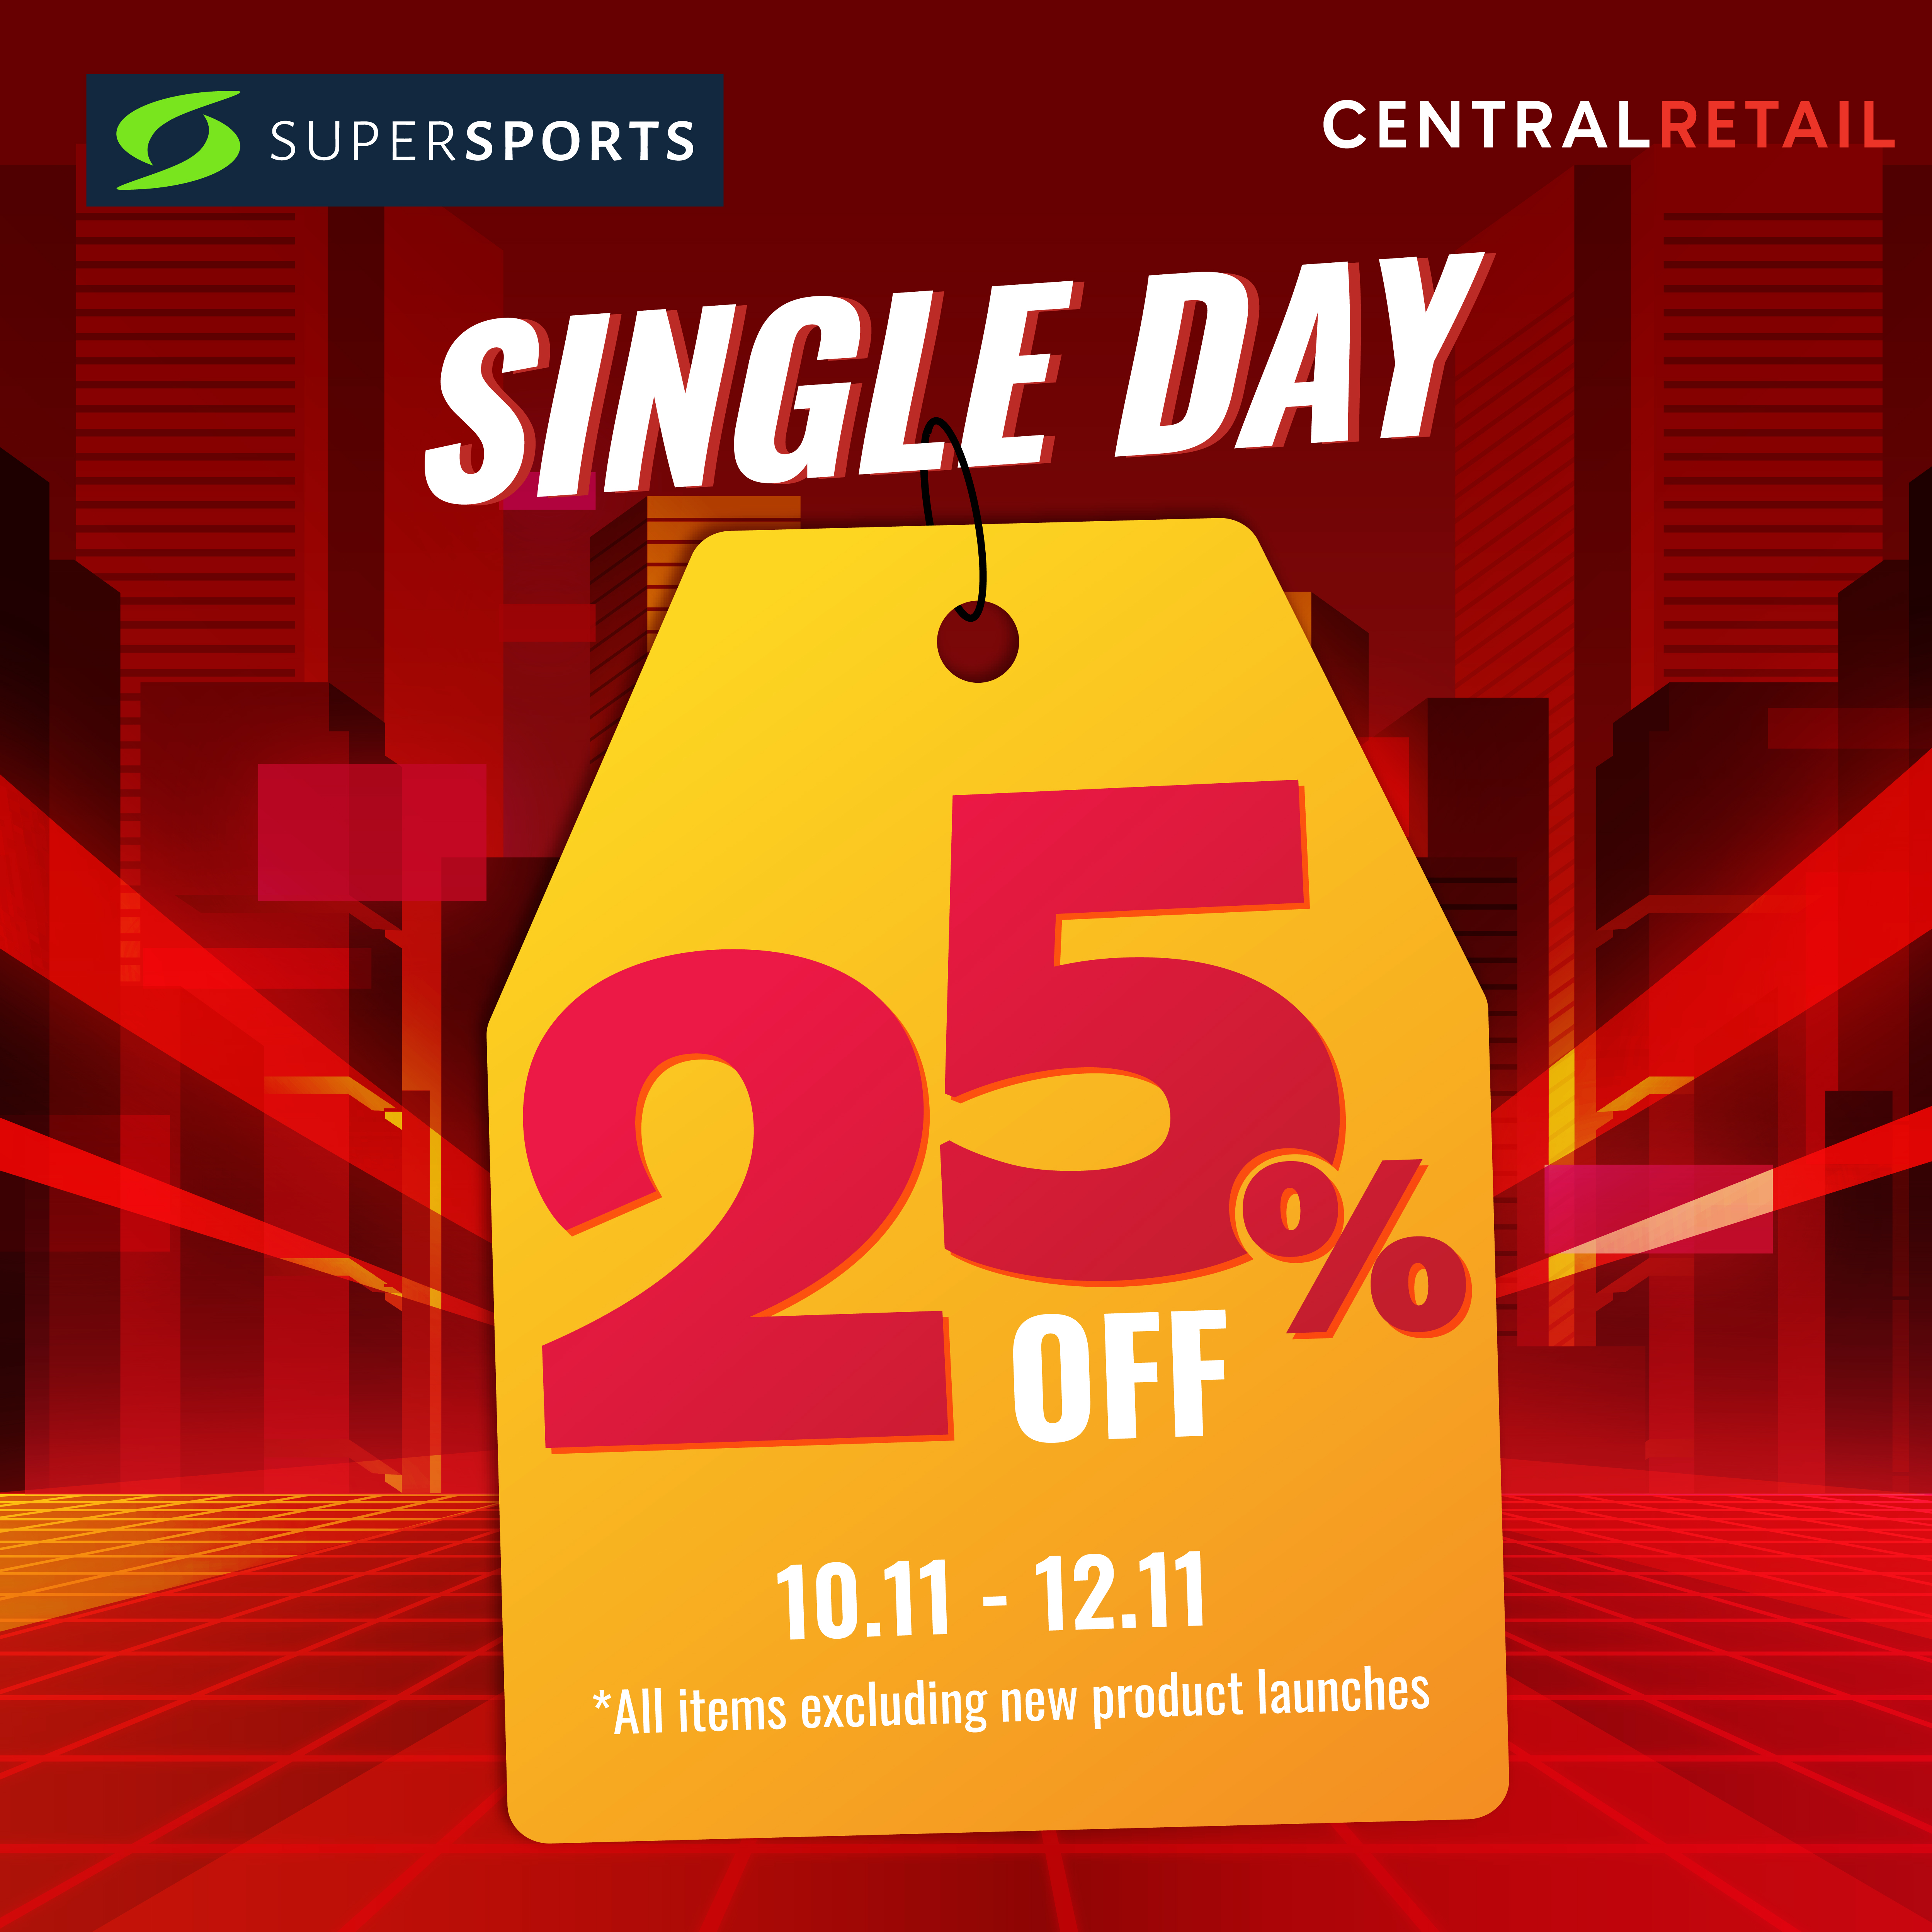 SINGLE DAY - GET BIG OFFER FROM SUPERSPORTS😍😍